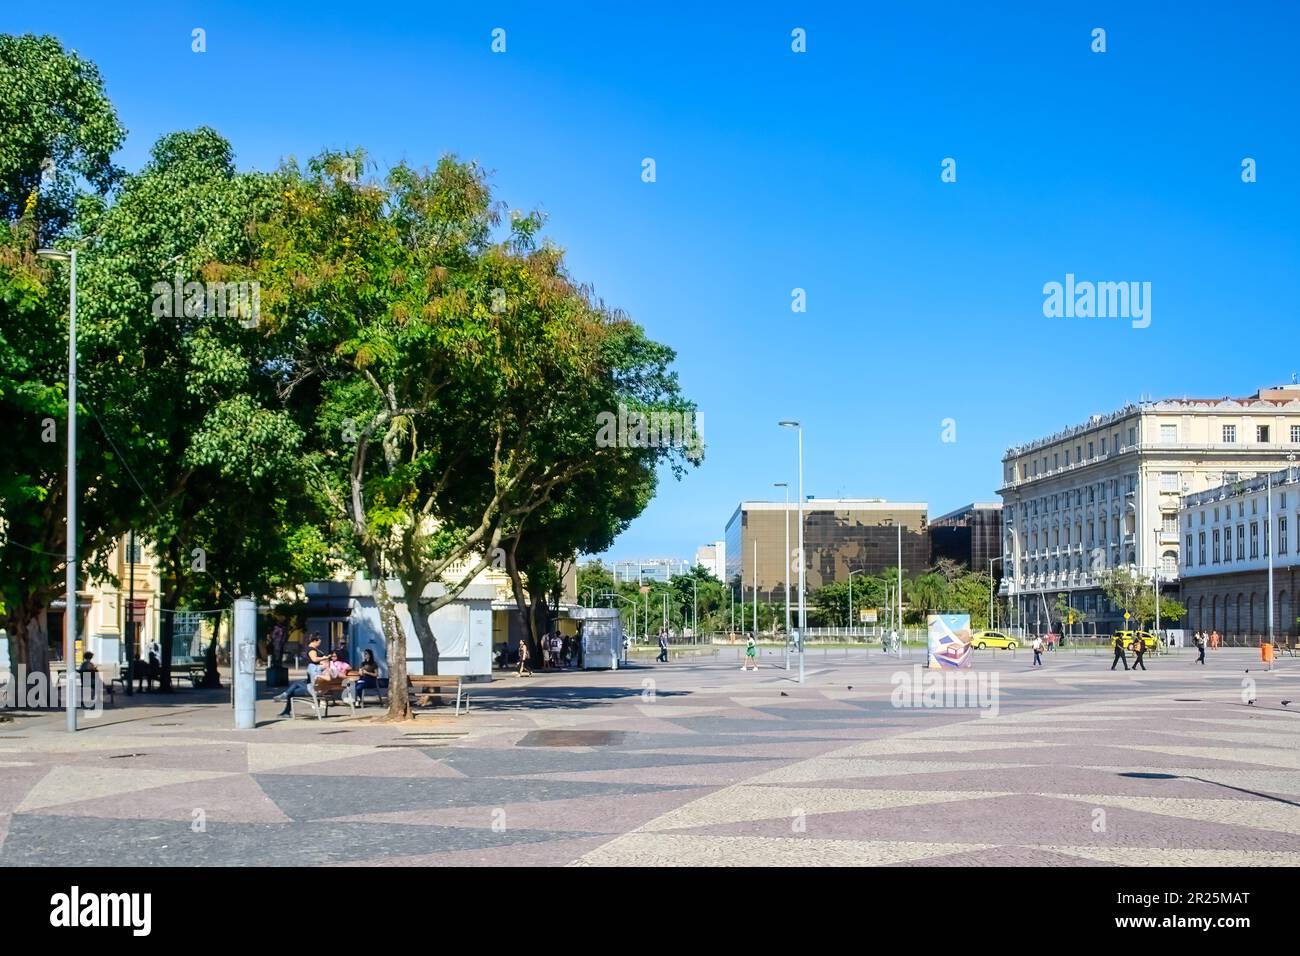 Rio de Janeiro, Brazil - May 2, 2023: A town square with cobblestone floor in red, black and white. Famous place in the downtown district. Stock Photo